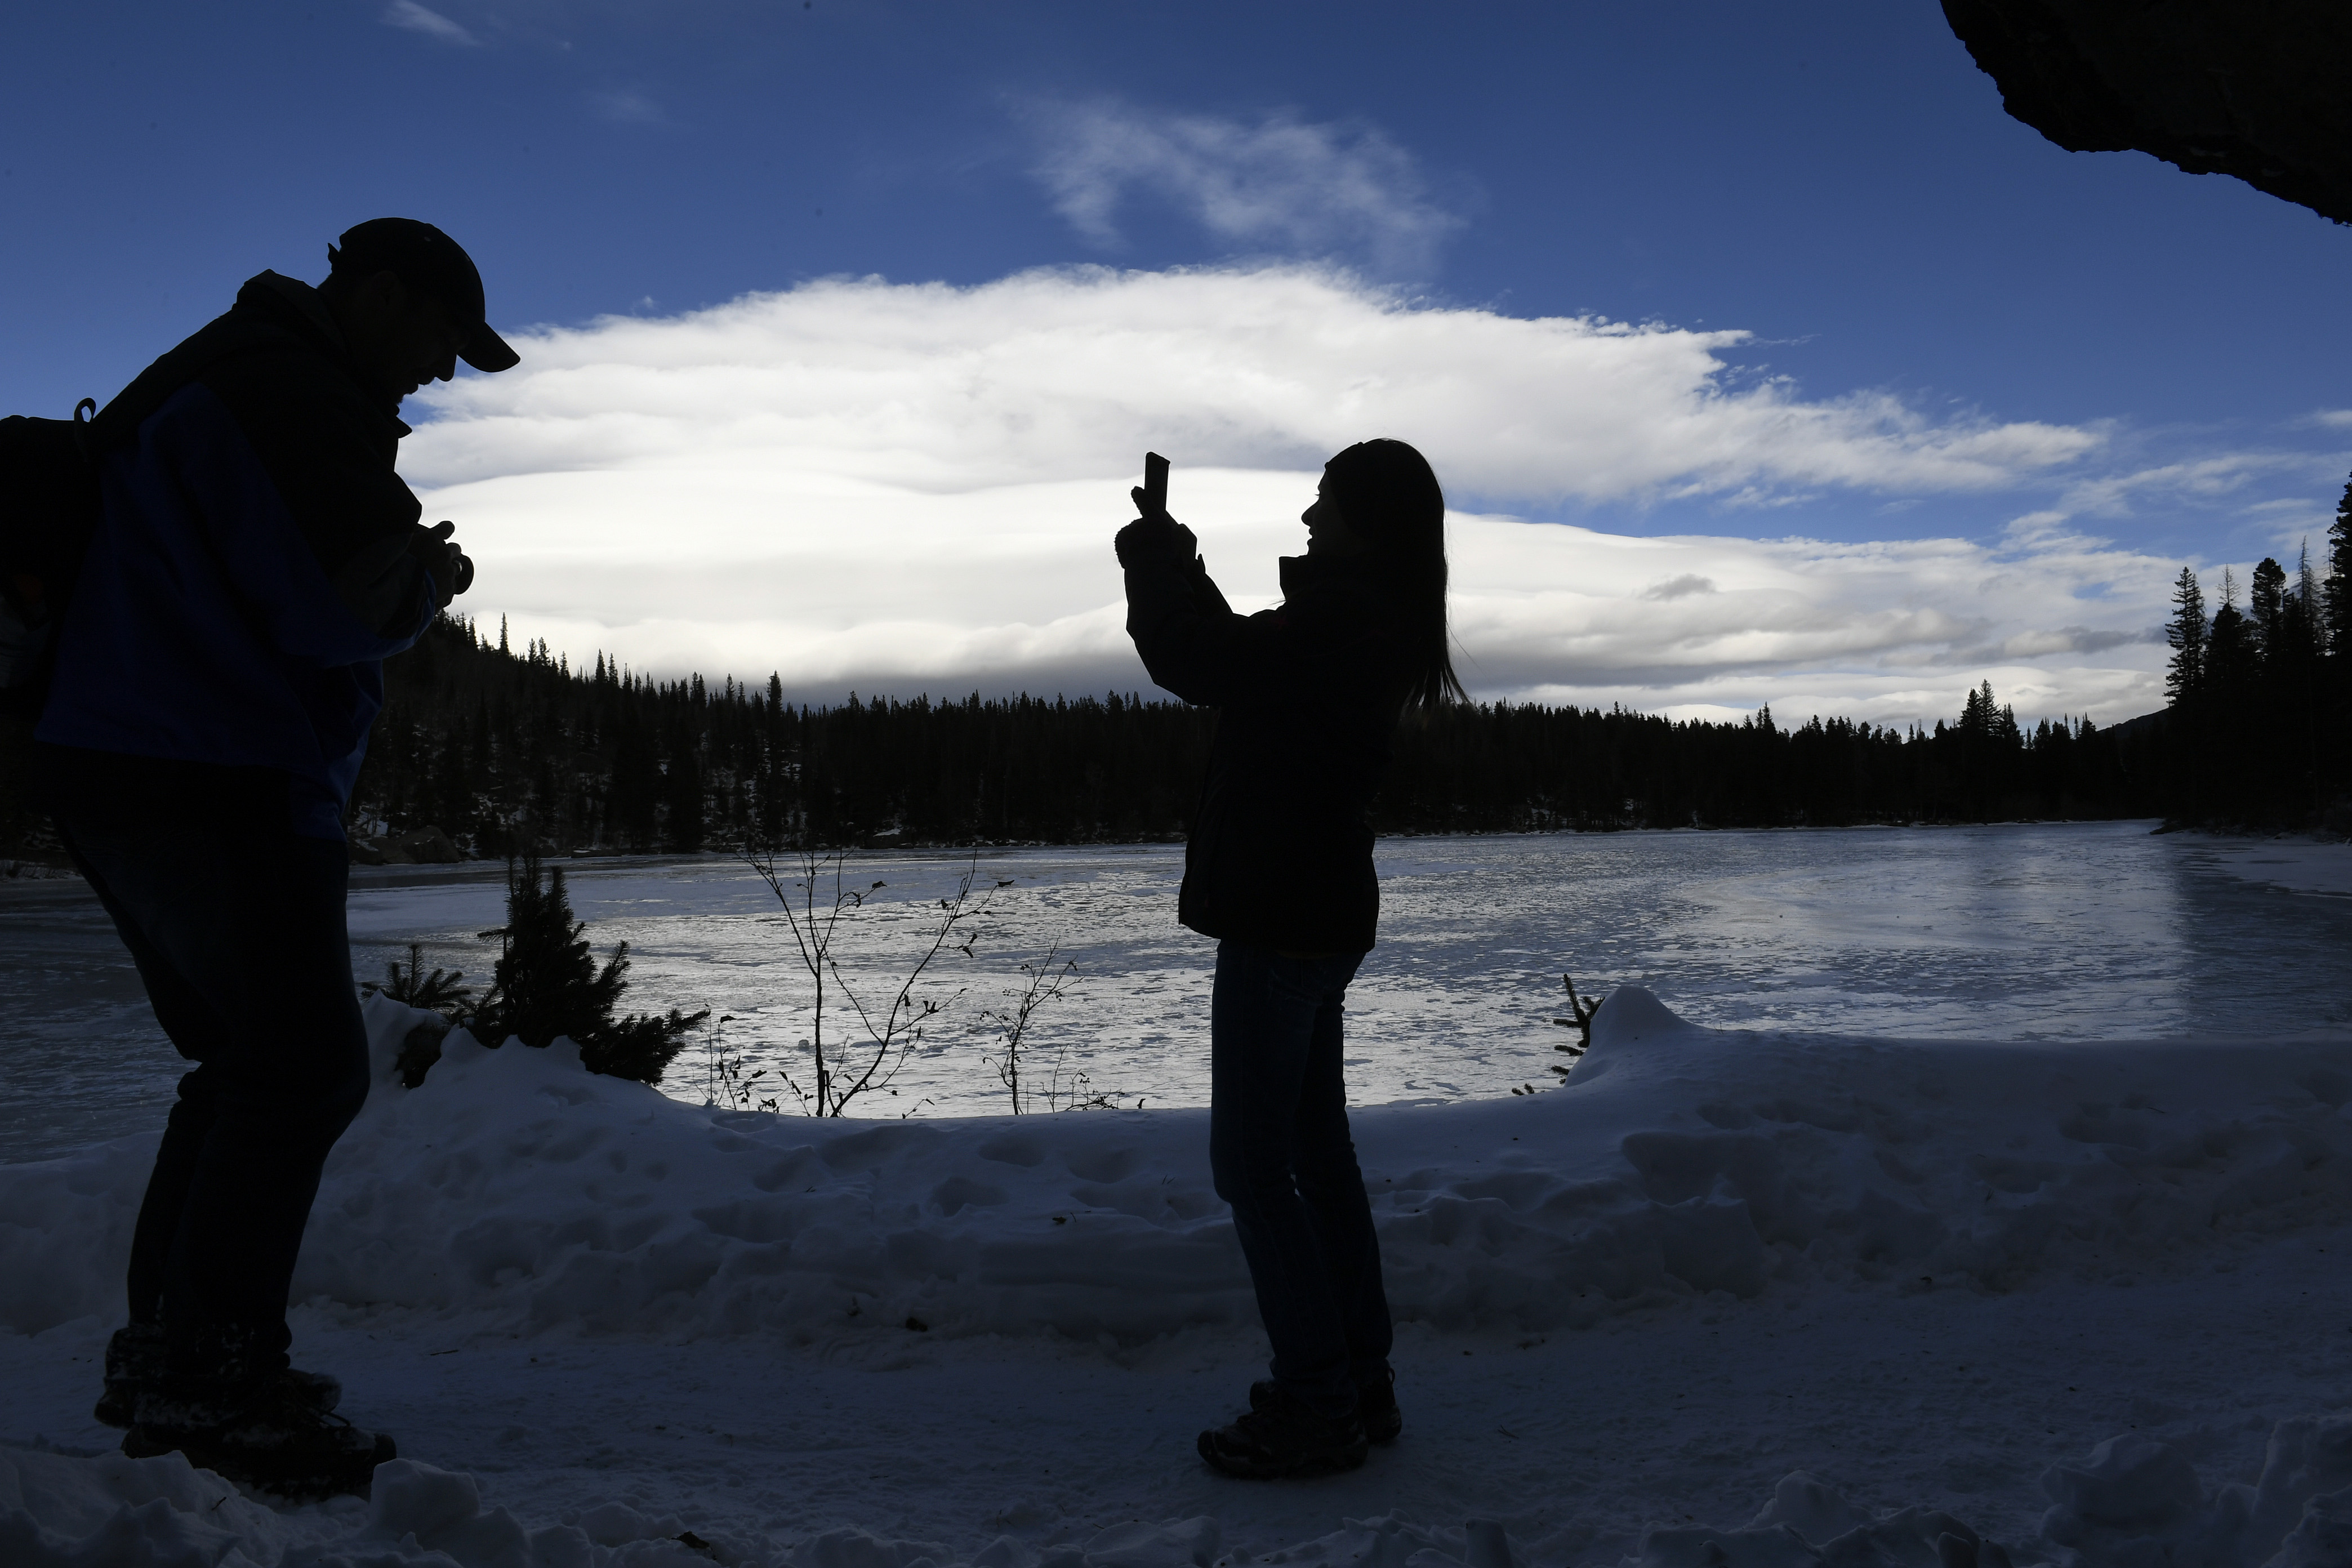 ROCKY MOUNTAIN NATIONAL PARK, CO - NOVEMBER 3: Alysia Fostek, right, and her husband Chris, left, take photos at the scenery around Bear Lake on November 3, 2019 in Rocky Mountain National Park, Colorado. Bear Lake is an easy hike from the parking lot with a multitude of longer hikes in the area. The couple were visiting the park from Collegeville, Pennsylvania. (Photo by Helen H. Richardson/The Denver Post)